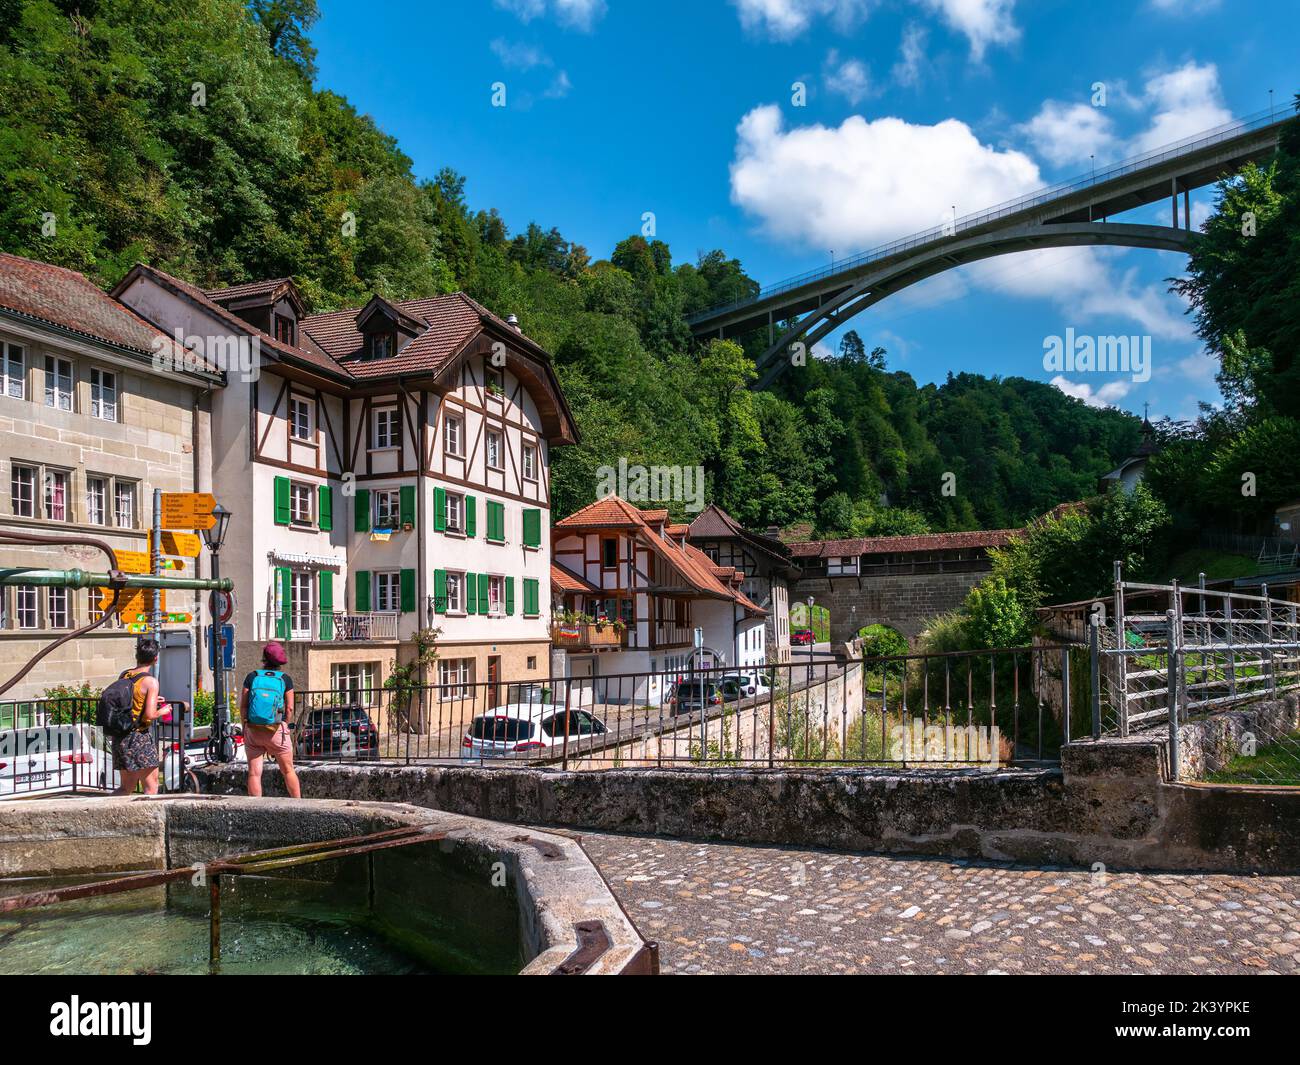 Fribourg, Switzerland - August 31, 2022: A modern highway viaduct over a historic old town of Fribourg, Switzerland Stock Photo